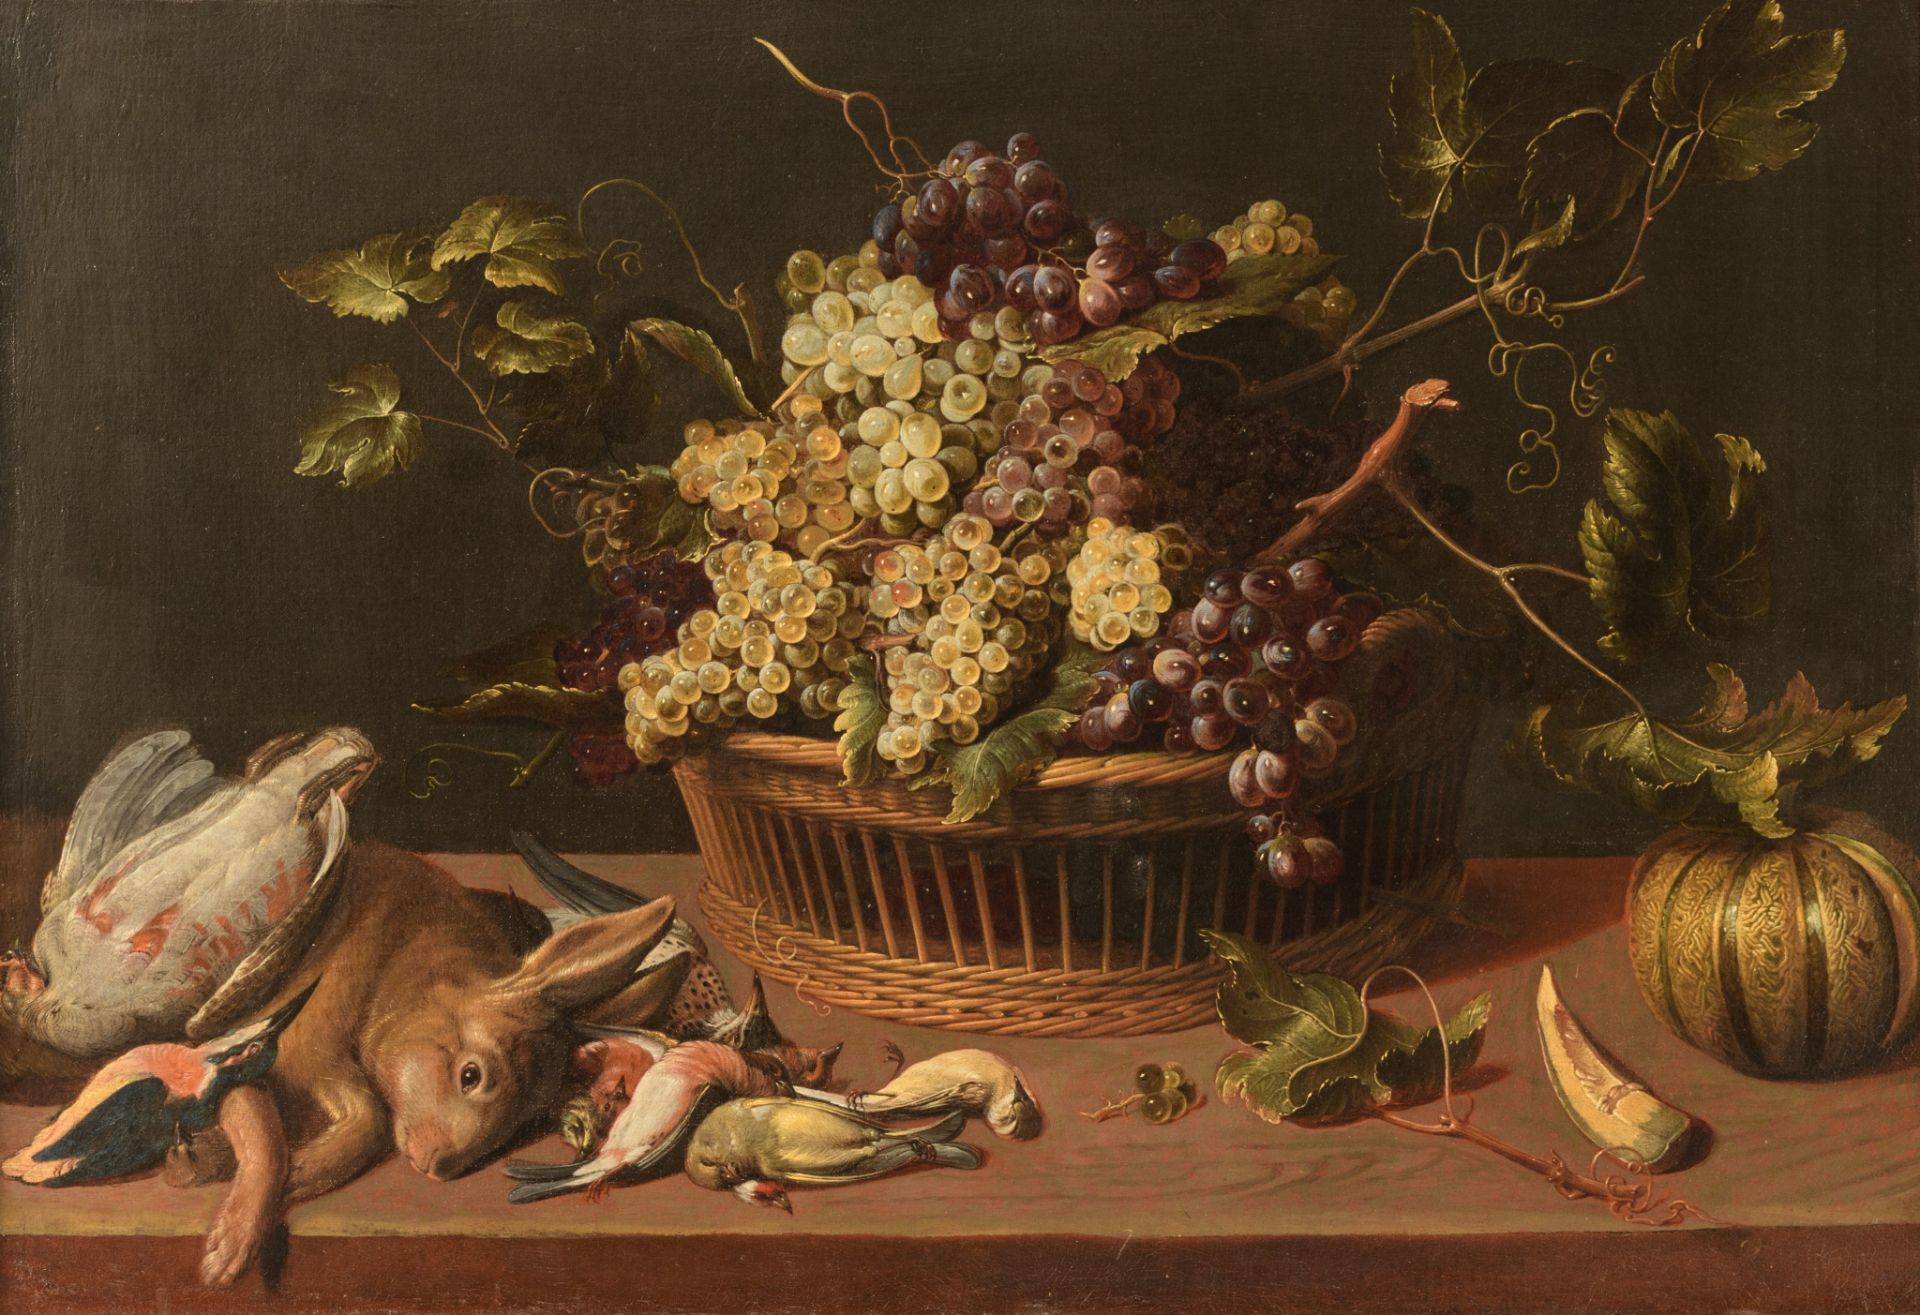 Still life with fruit, birds and a hare, 17th/18thC, oil on canvas, 76 x 110 cm